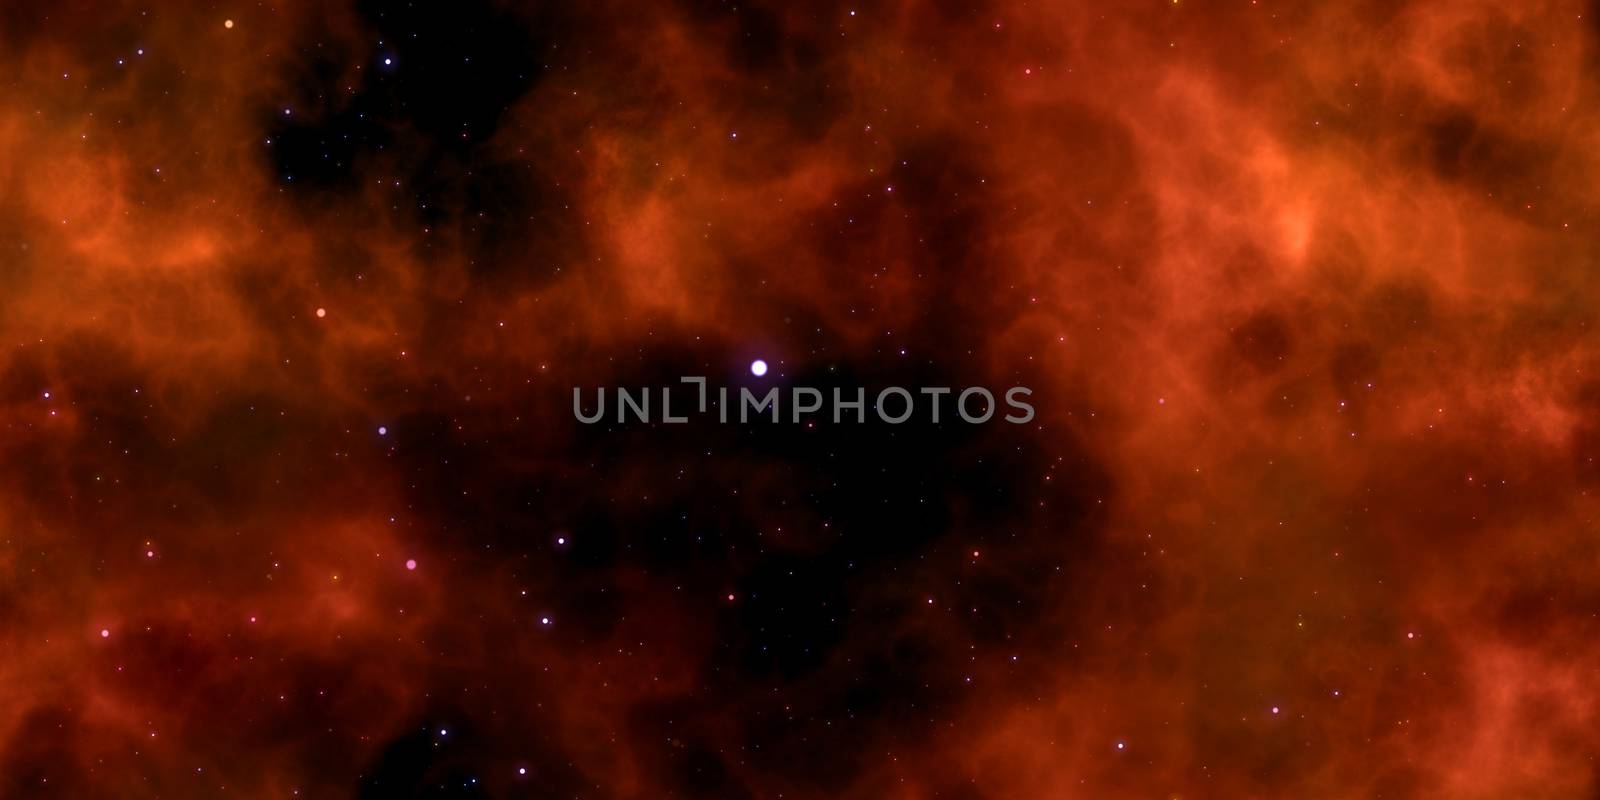 Dark Starry Clouds on Night Sky Galaxy Background. Abstract Cosmos Infinity Texture. 3D Rendering. 3D Illustration.